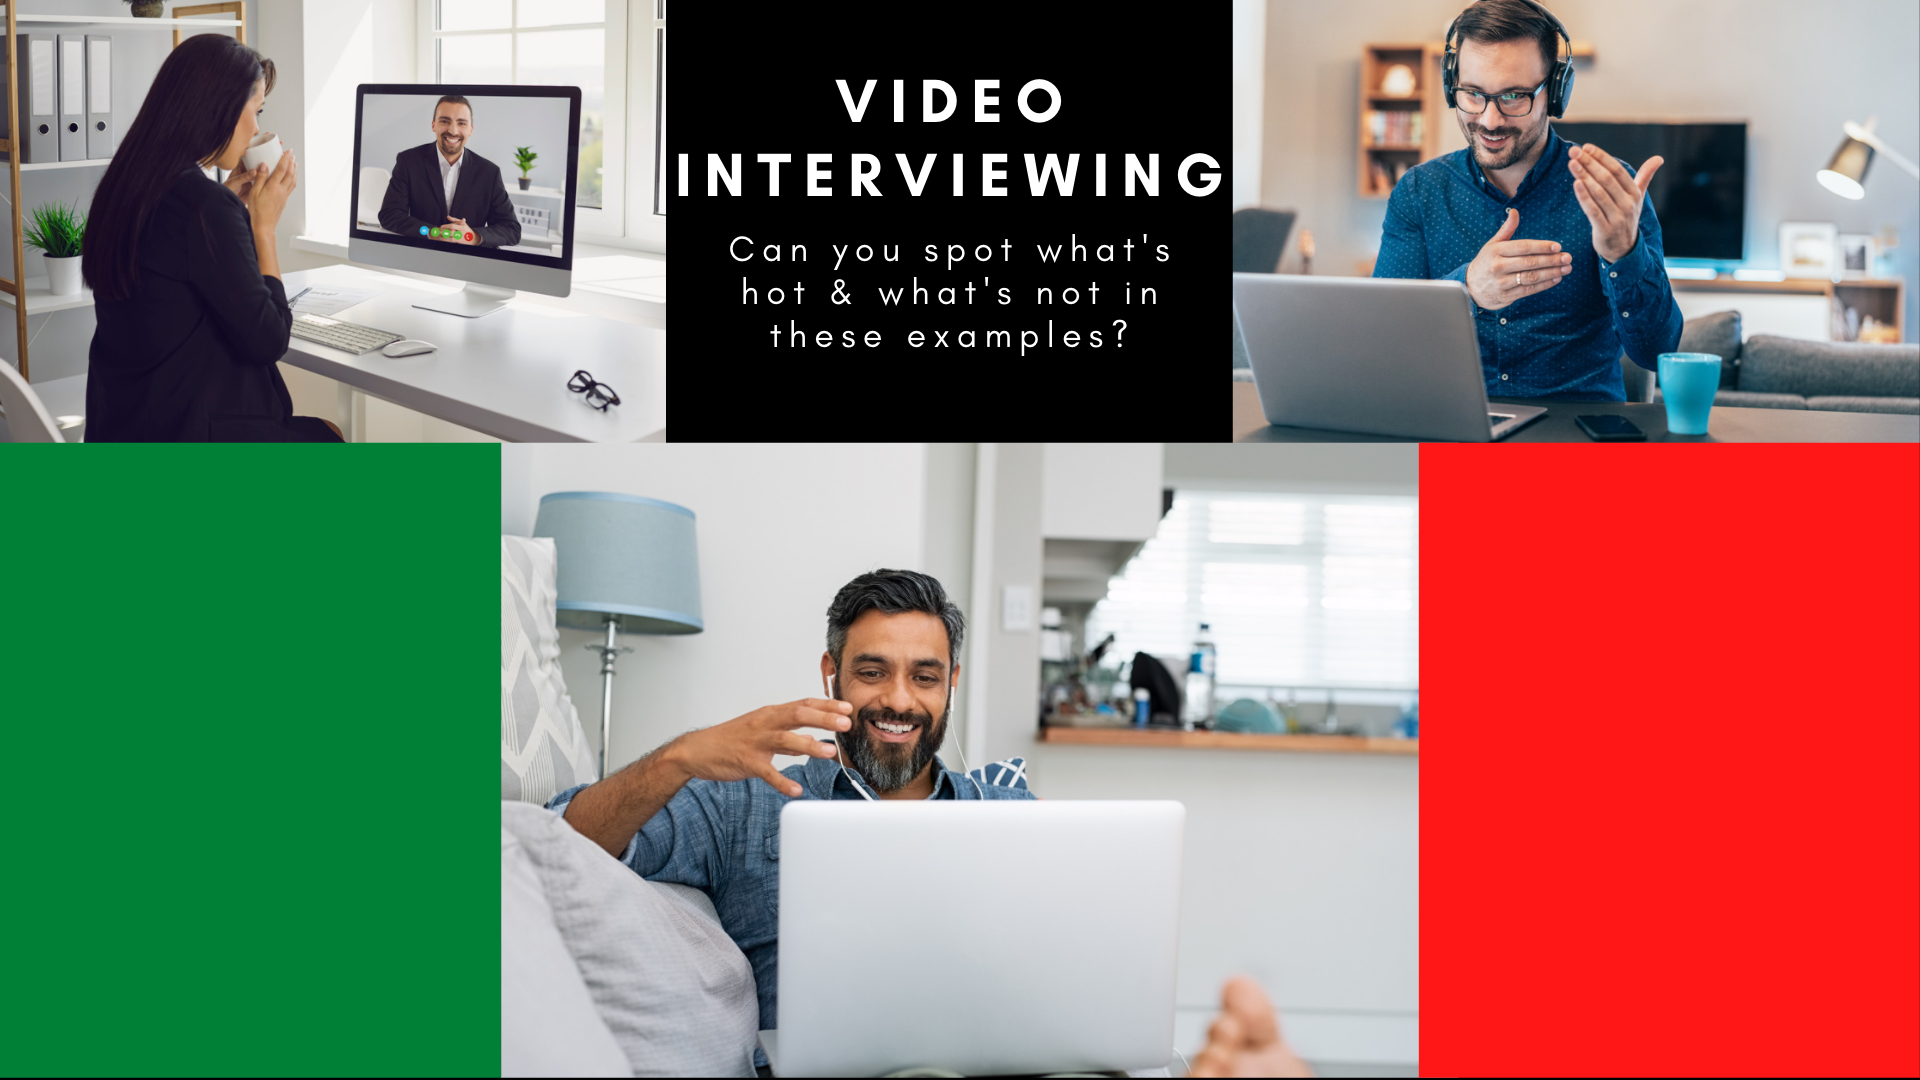 Video interviewing